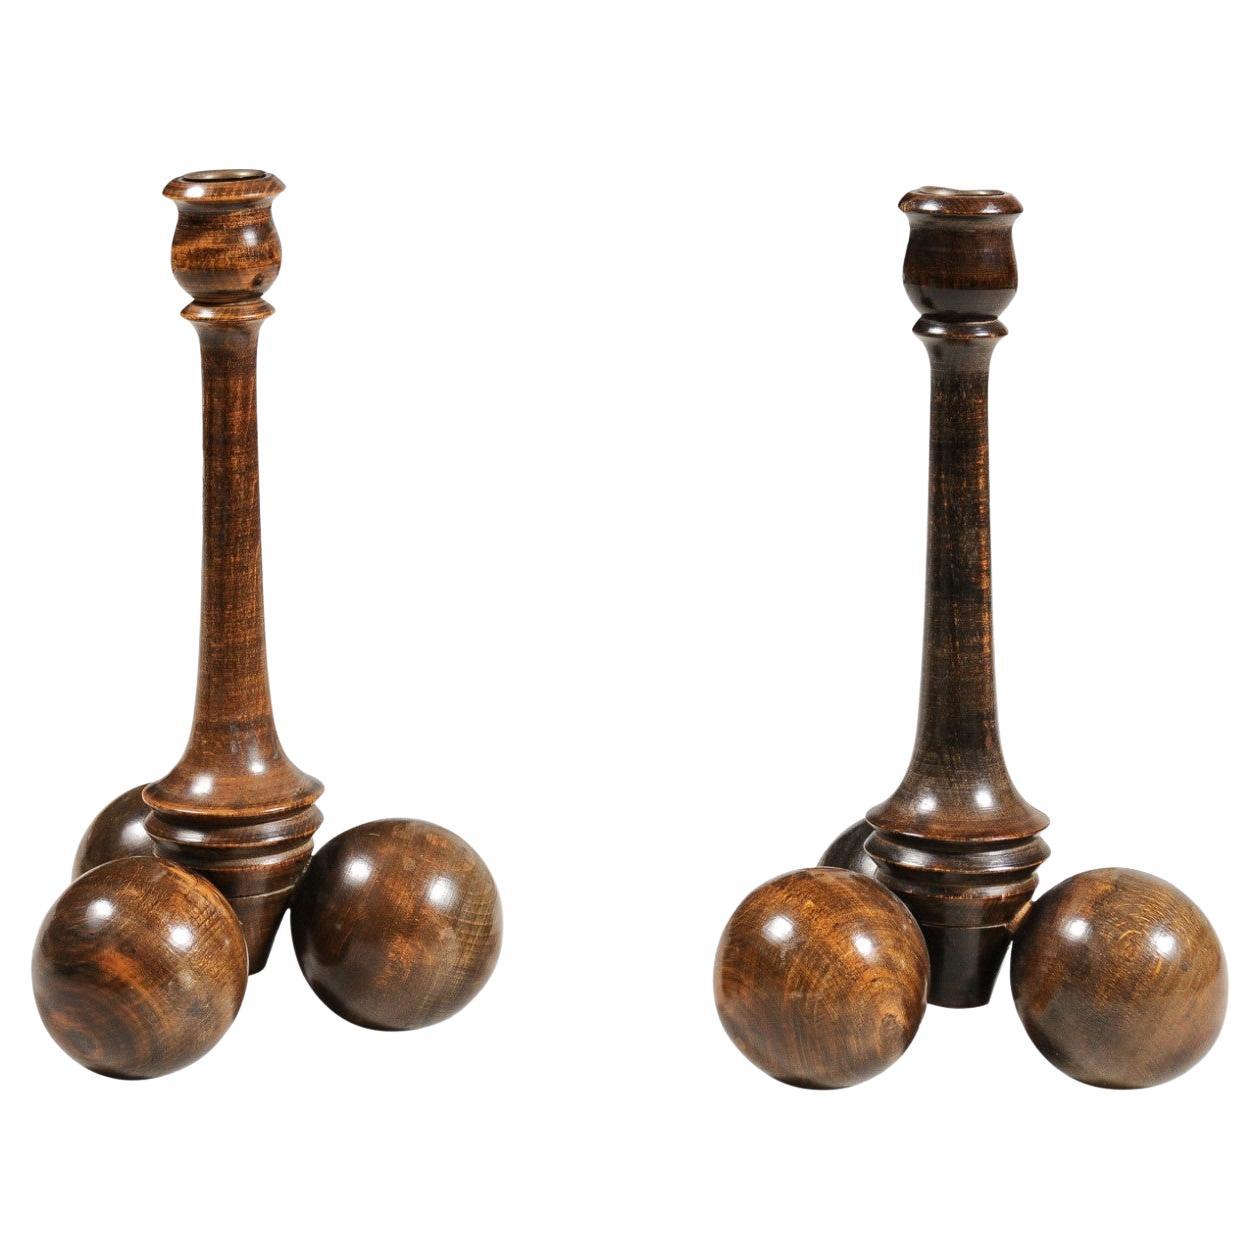 Pair of English Victorian Period Late 19th Century Sphere Bases Candlesticks For Sale